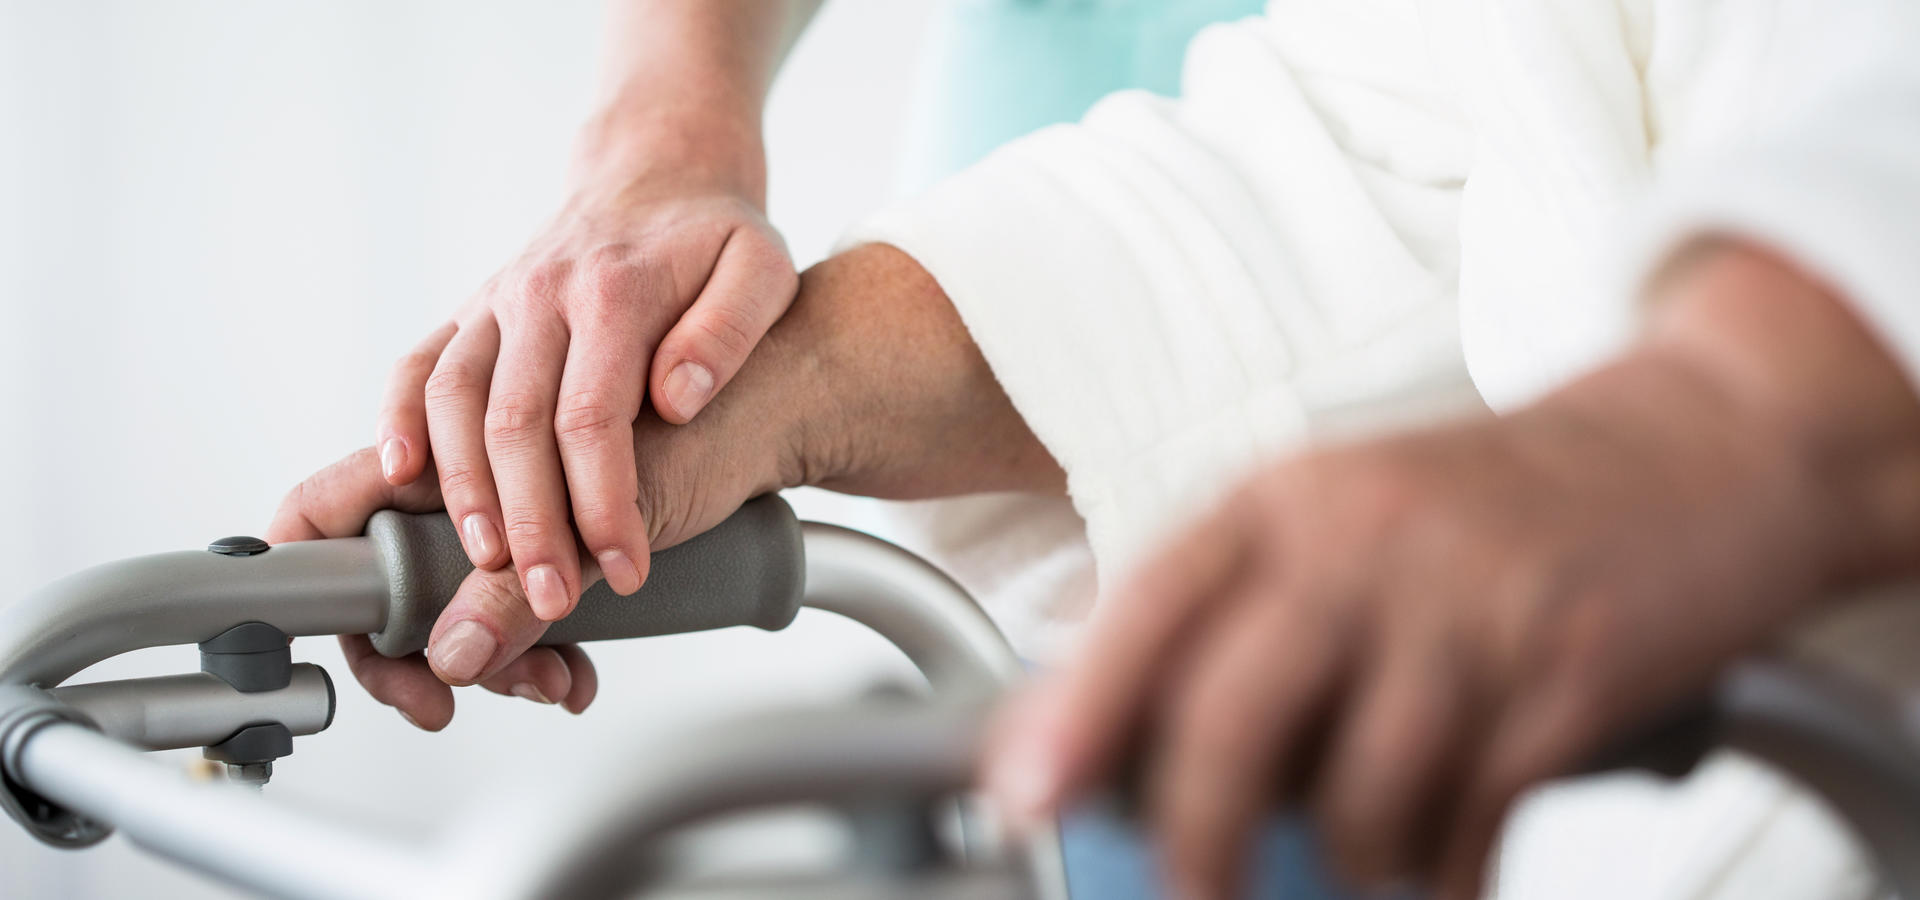 A senior living and long-term care themed photo: a caregiver's hand gently rests on one of the hands of a senior living resident, whose hands are holding on to a walker. A close up photo. 